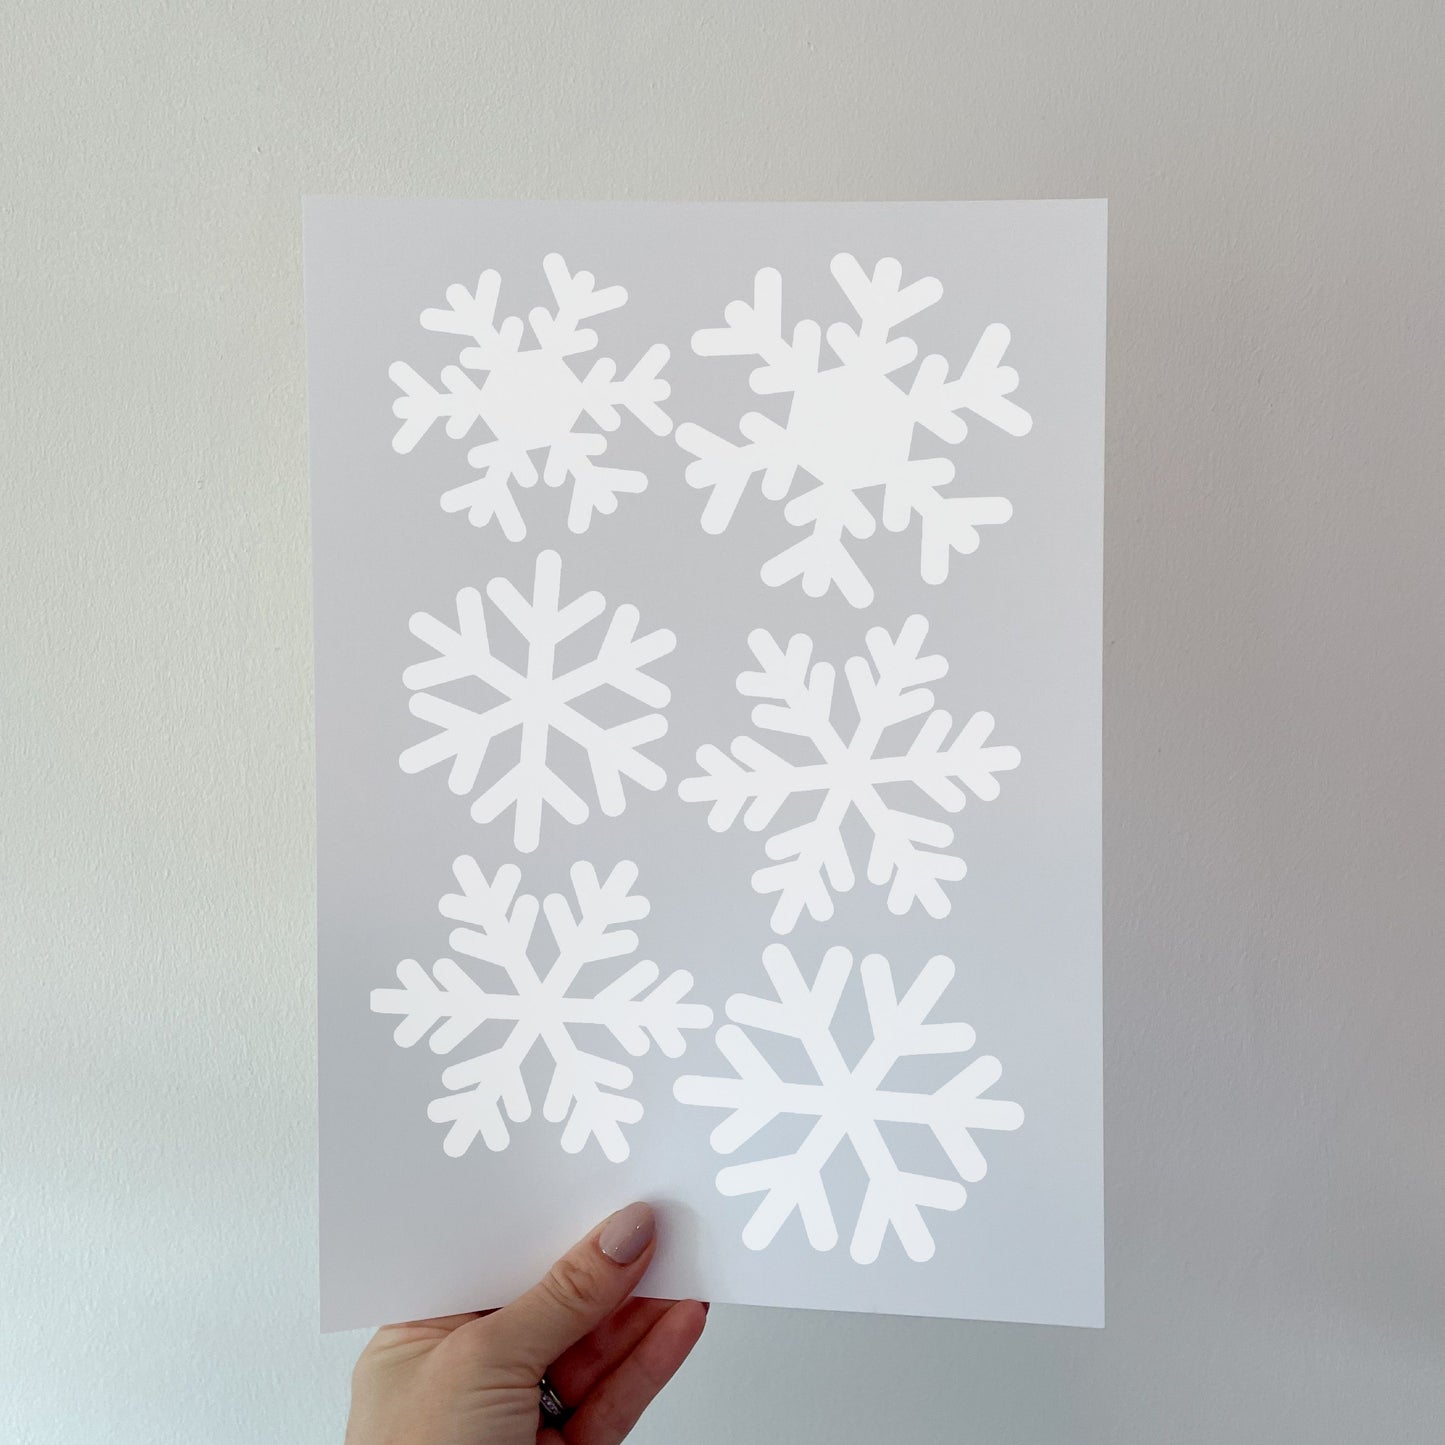 Value Wall Sticker Sheets - Christmas Snowflakes - Large